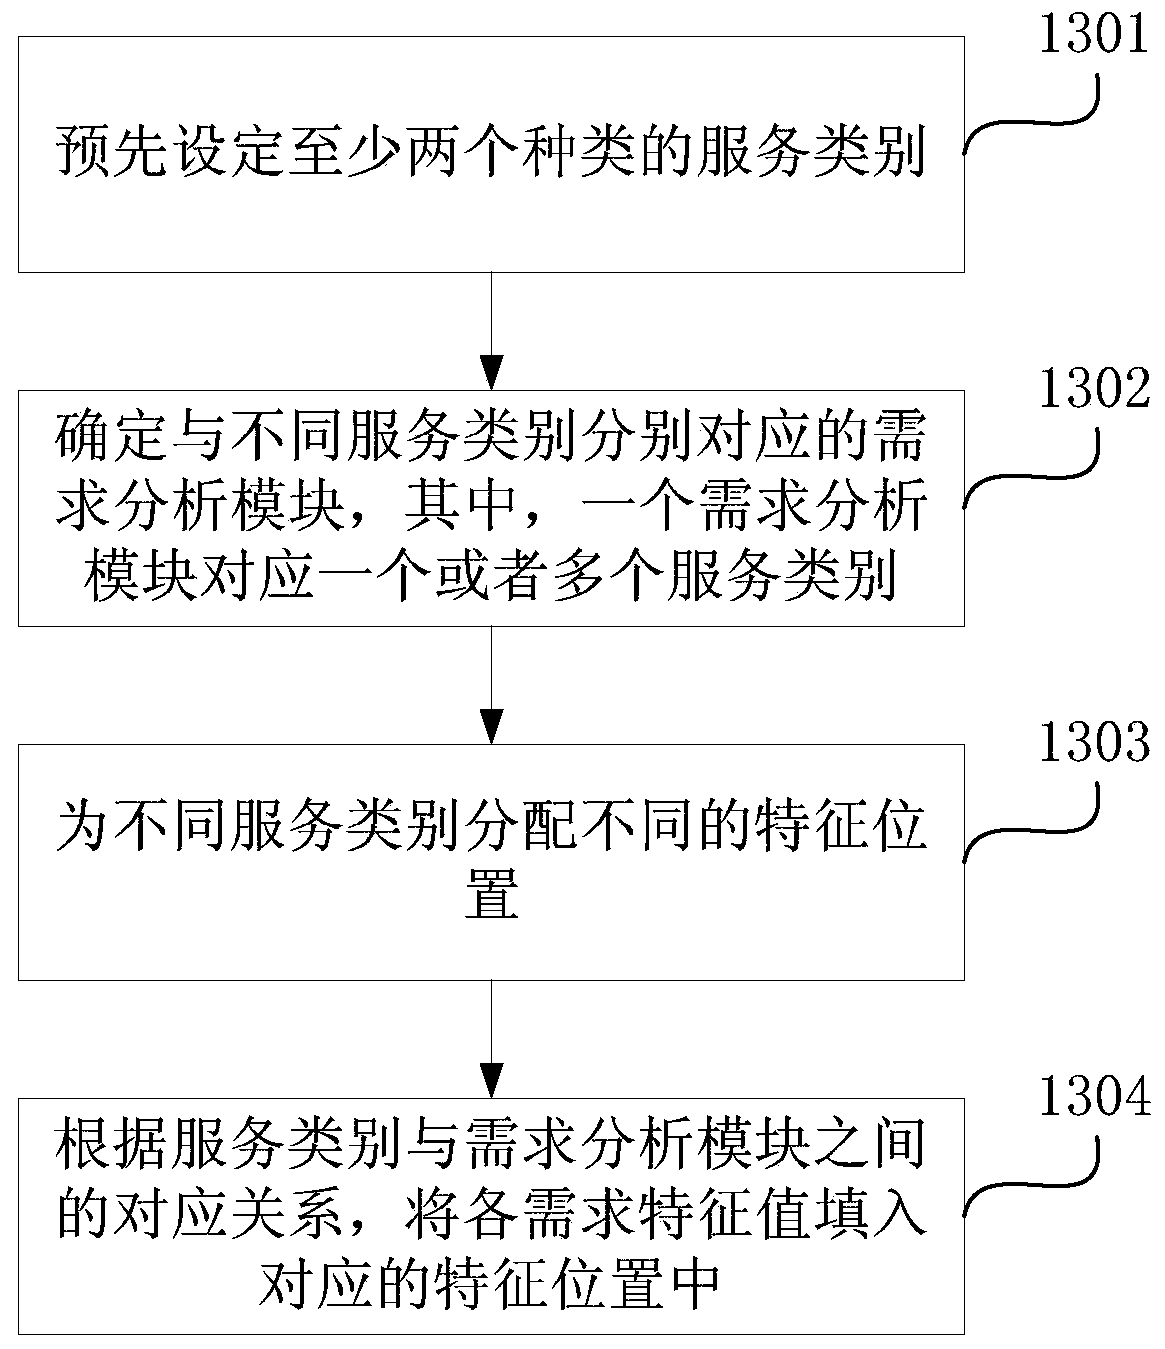 Method and device for ordering services based on artificial intelligence